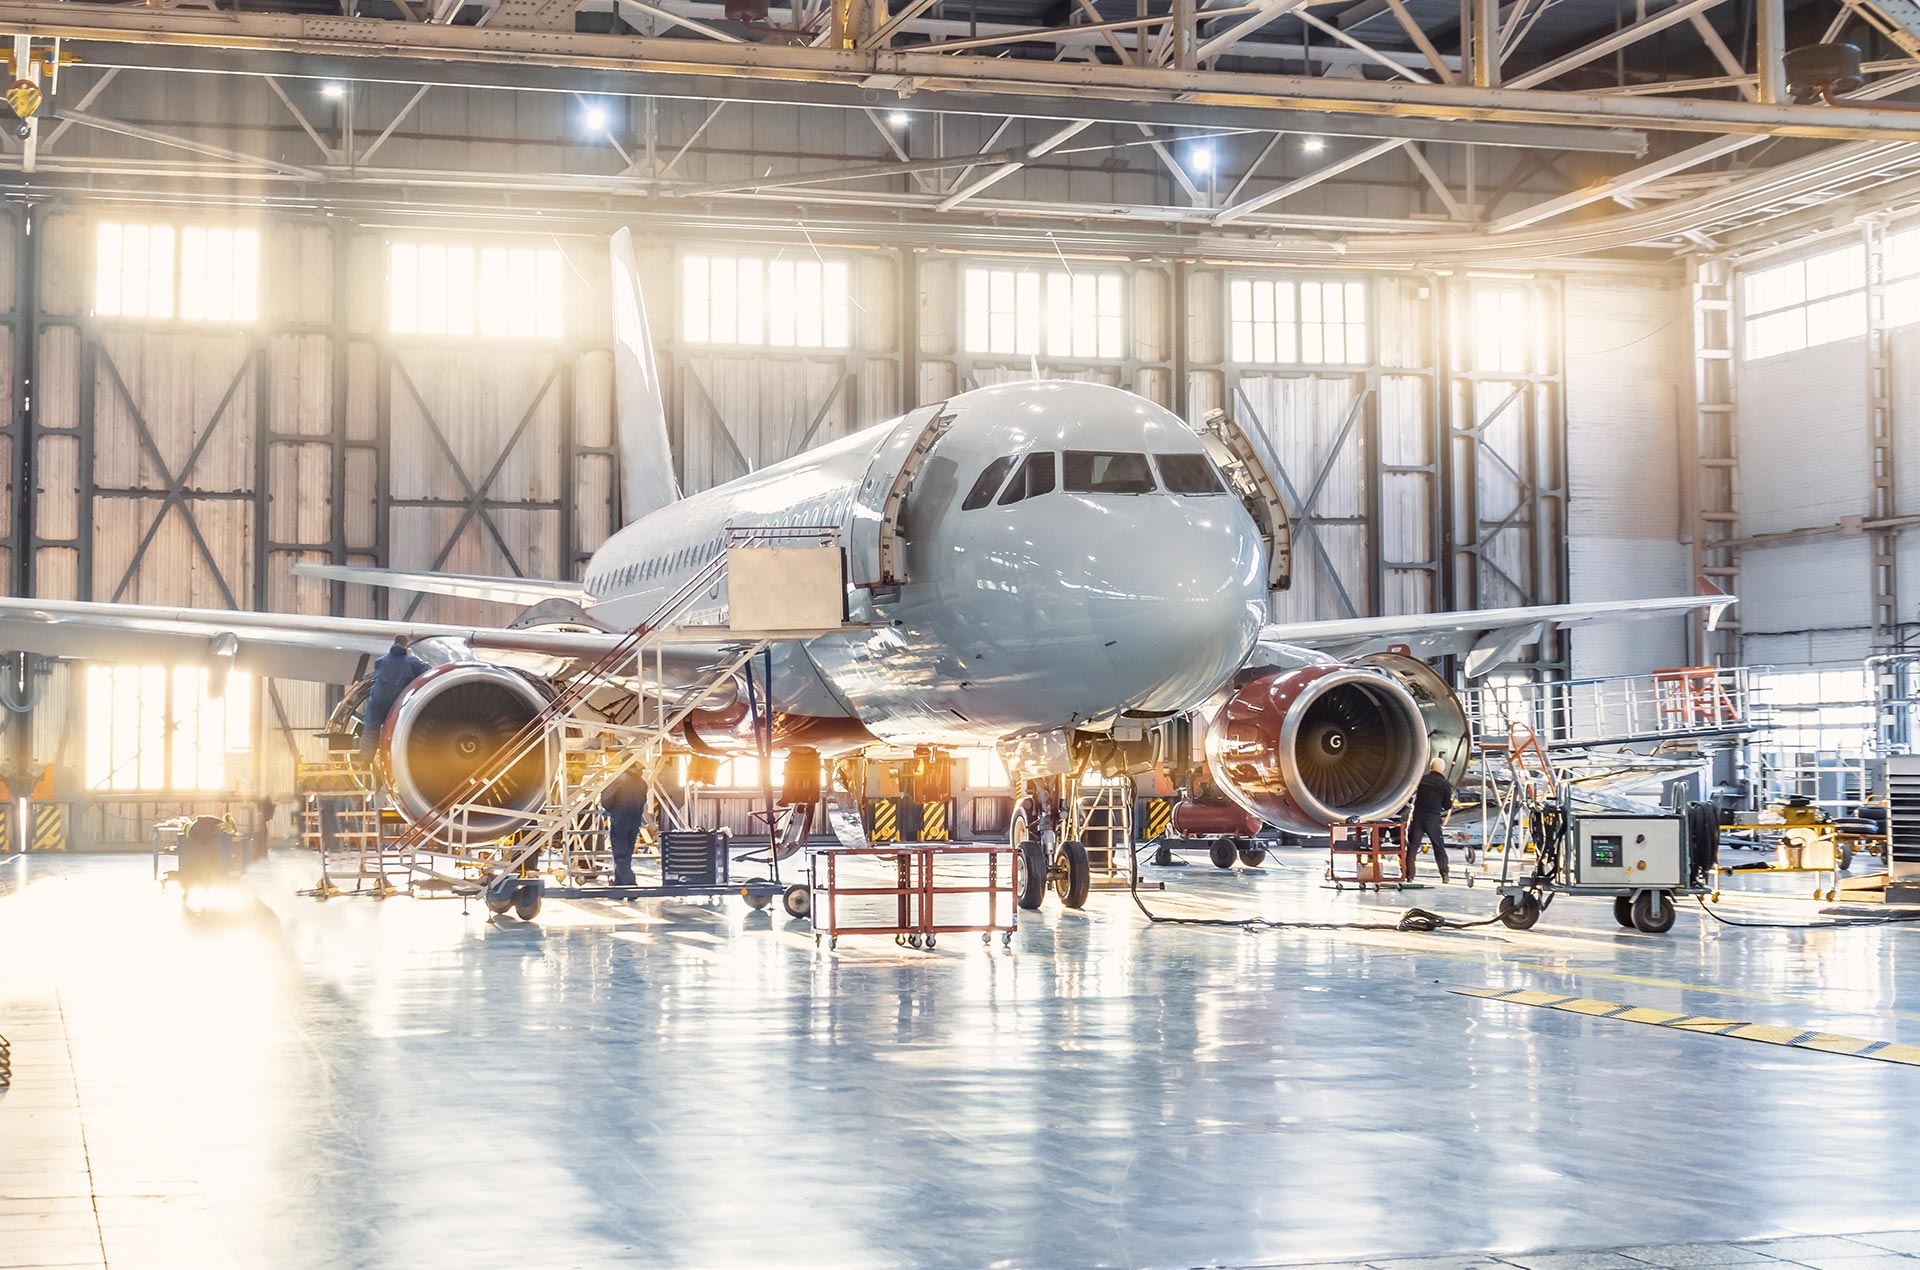 Serving the Needs of Aerospace Manufacturers